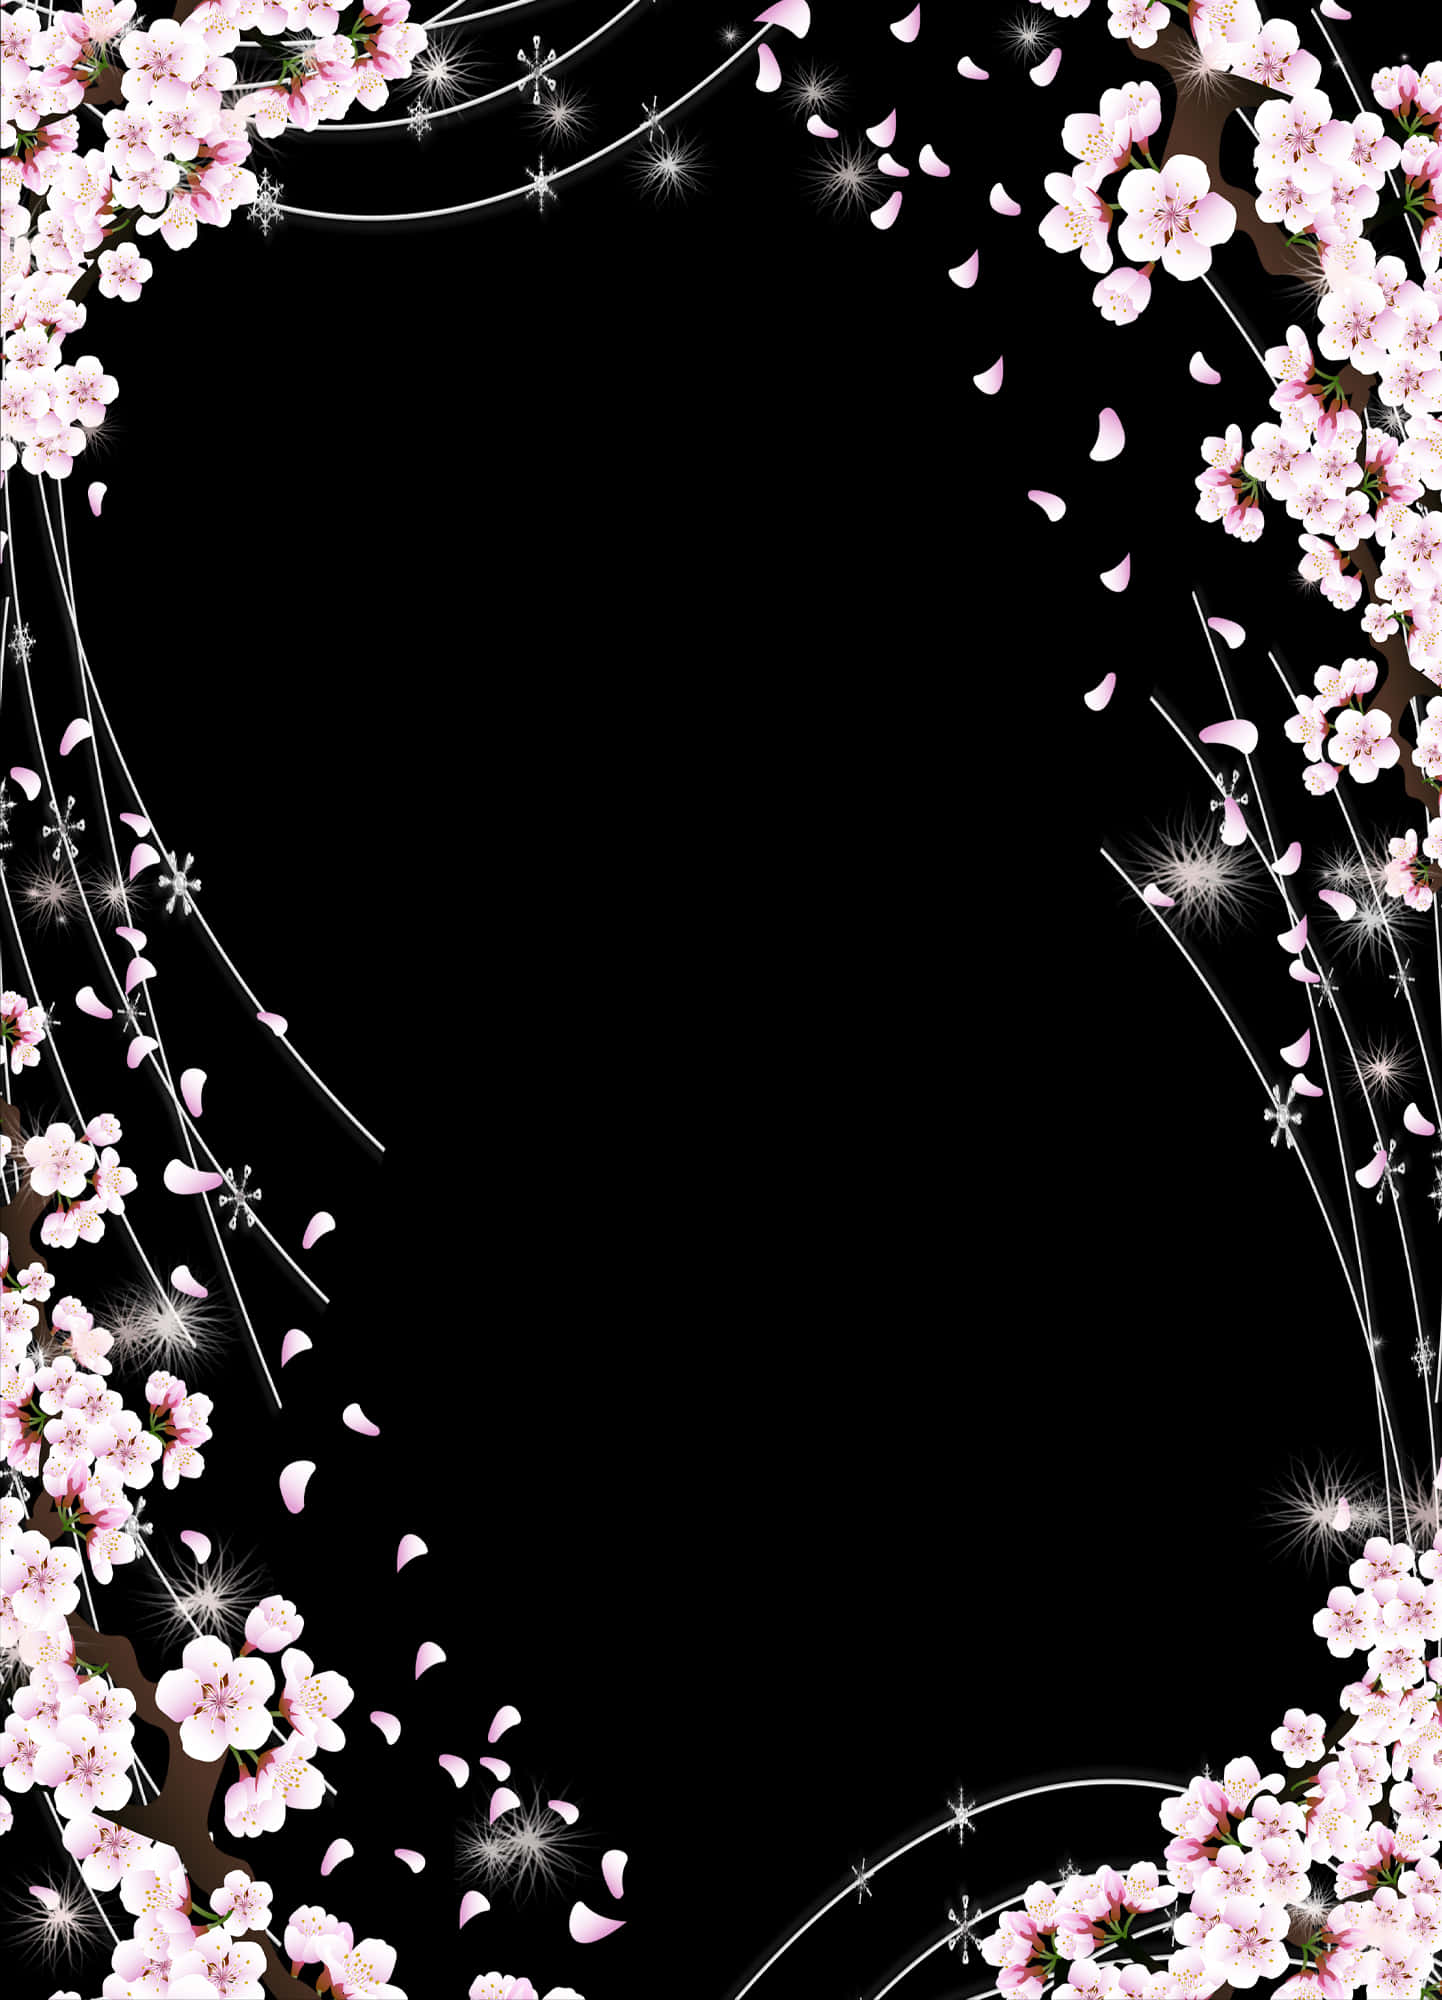 A Black Background With Pink Flowers